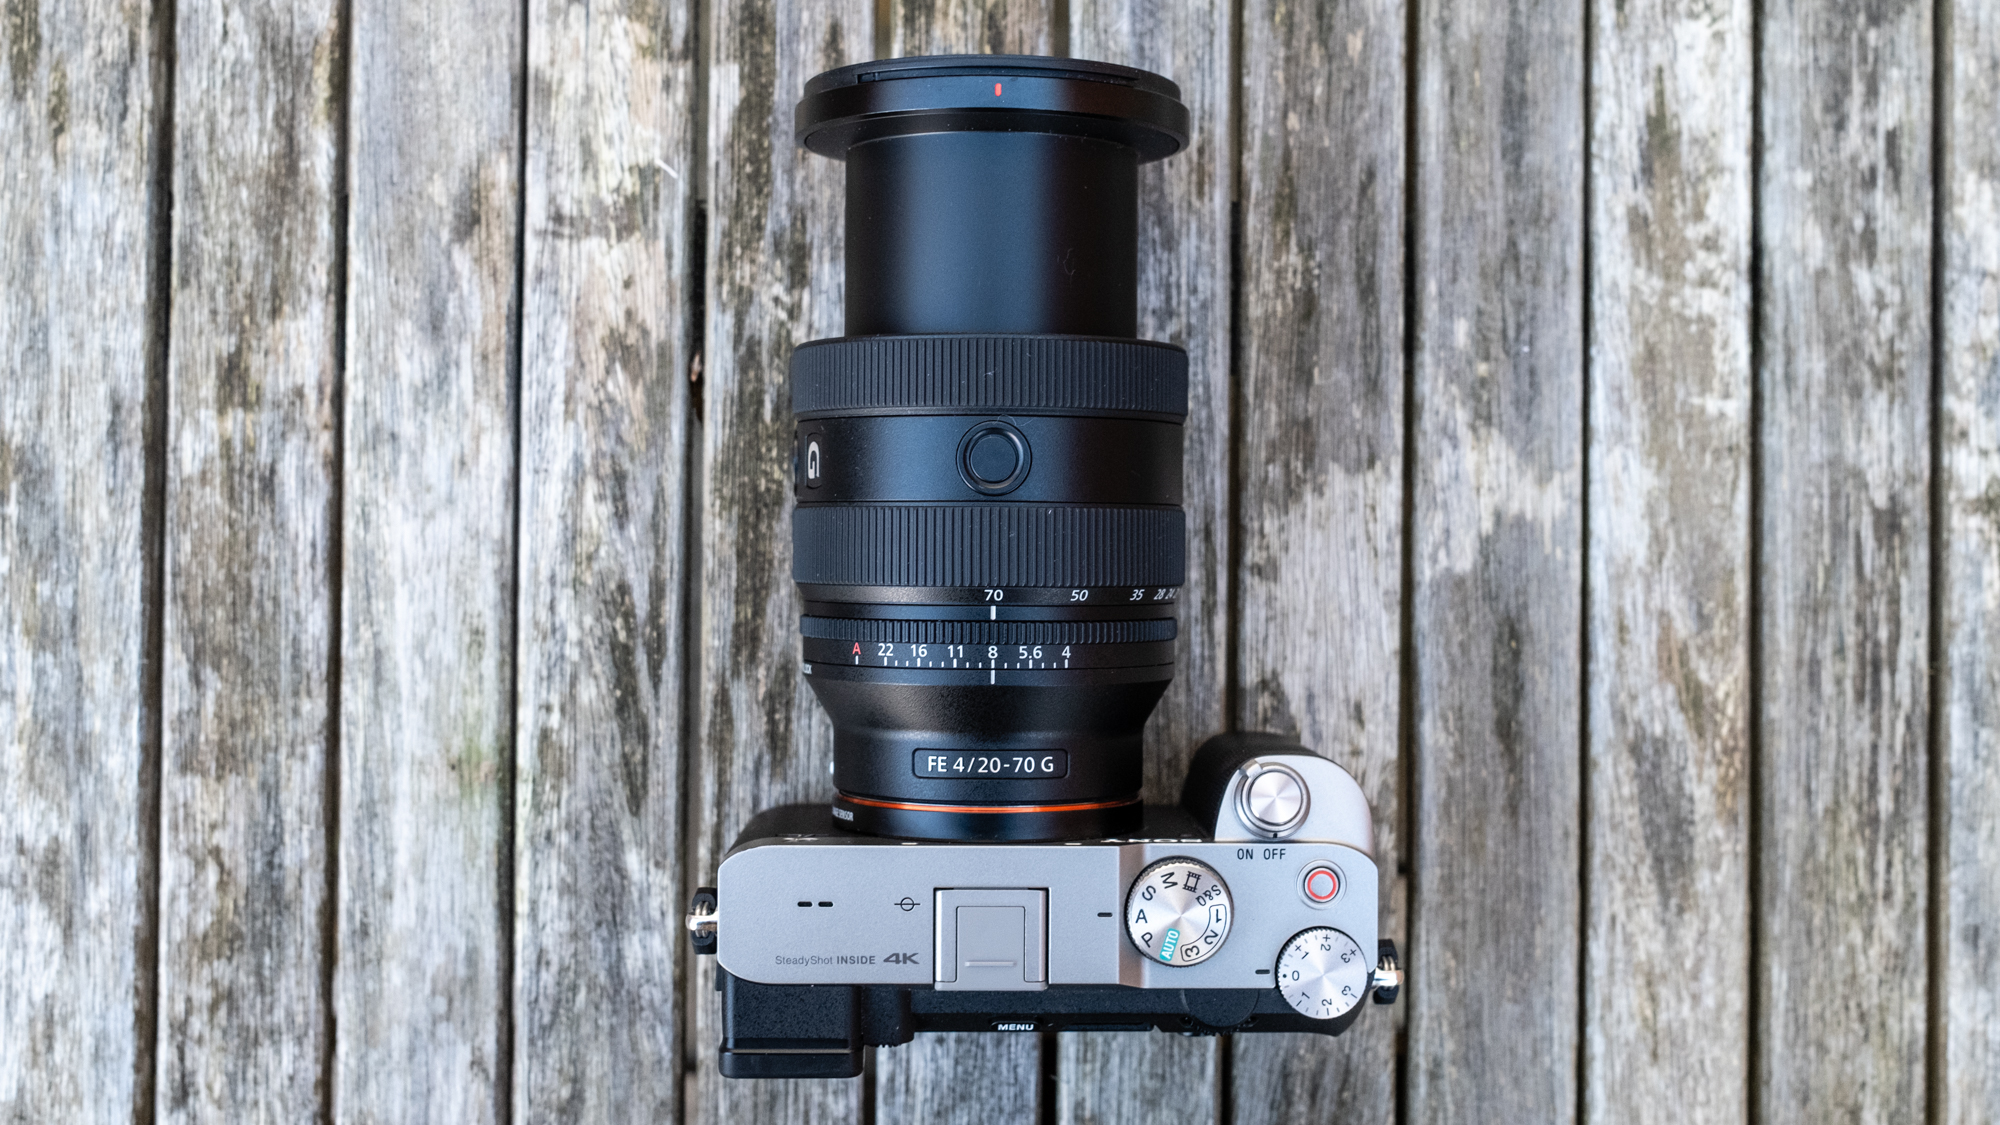 Sony FE 20-70mm F4 G attached to Sony A7C on wooden table lens barrel extended